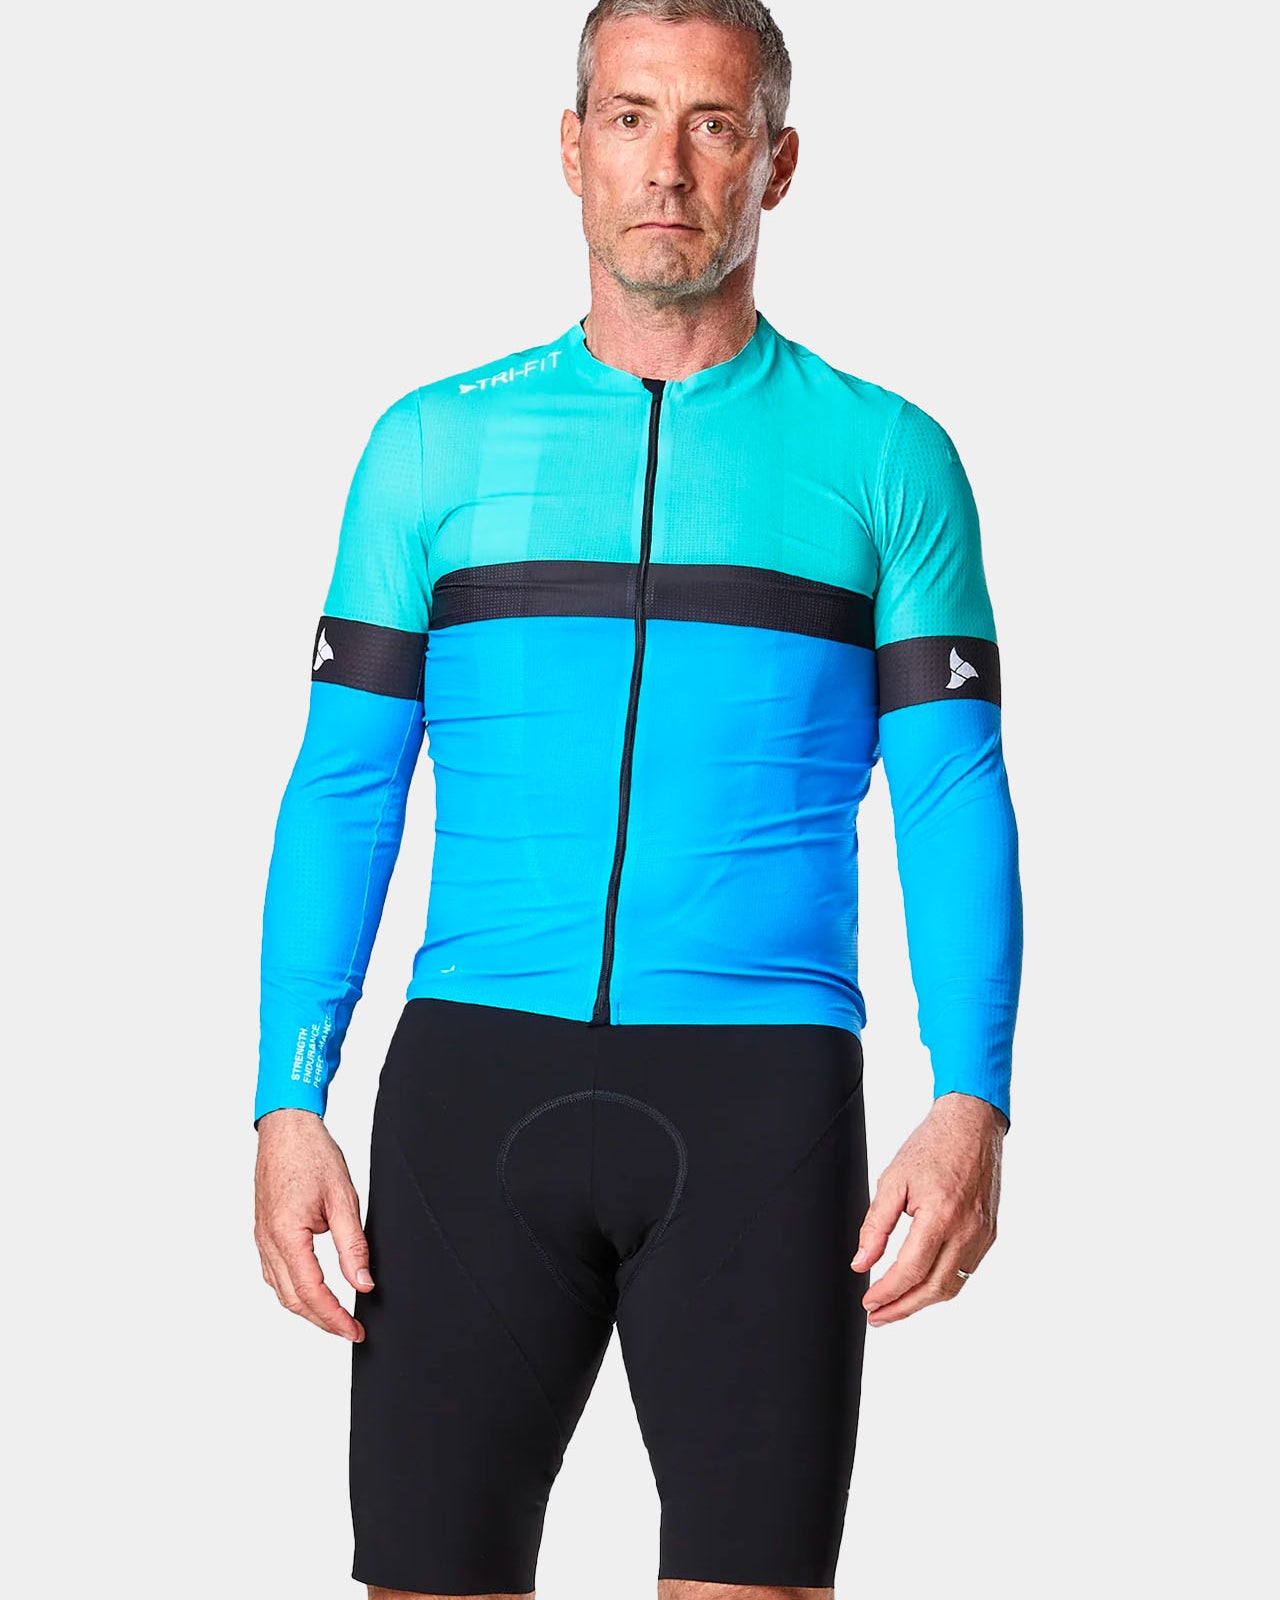 TRI-FIT SYKL PRO long sleeve cycling jersey